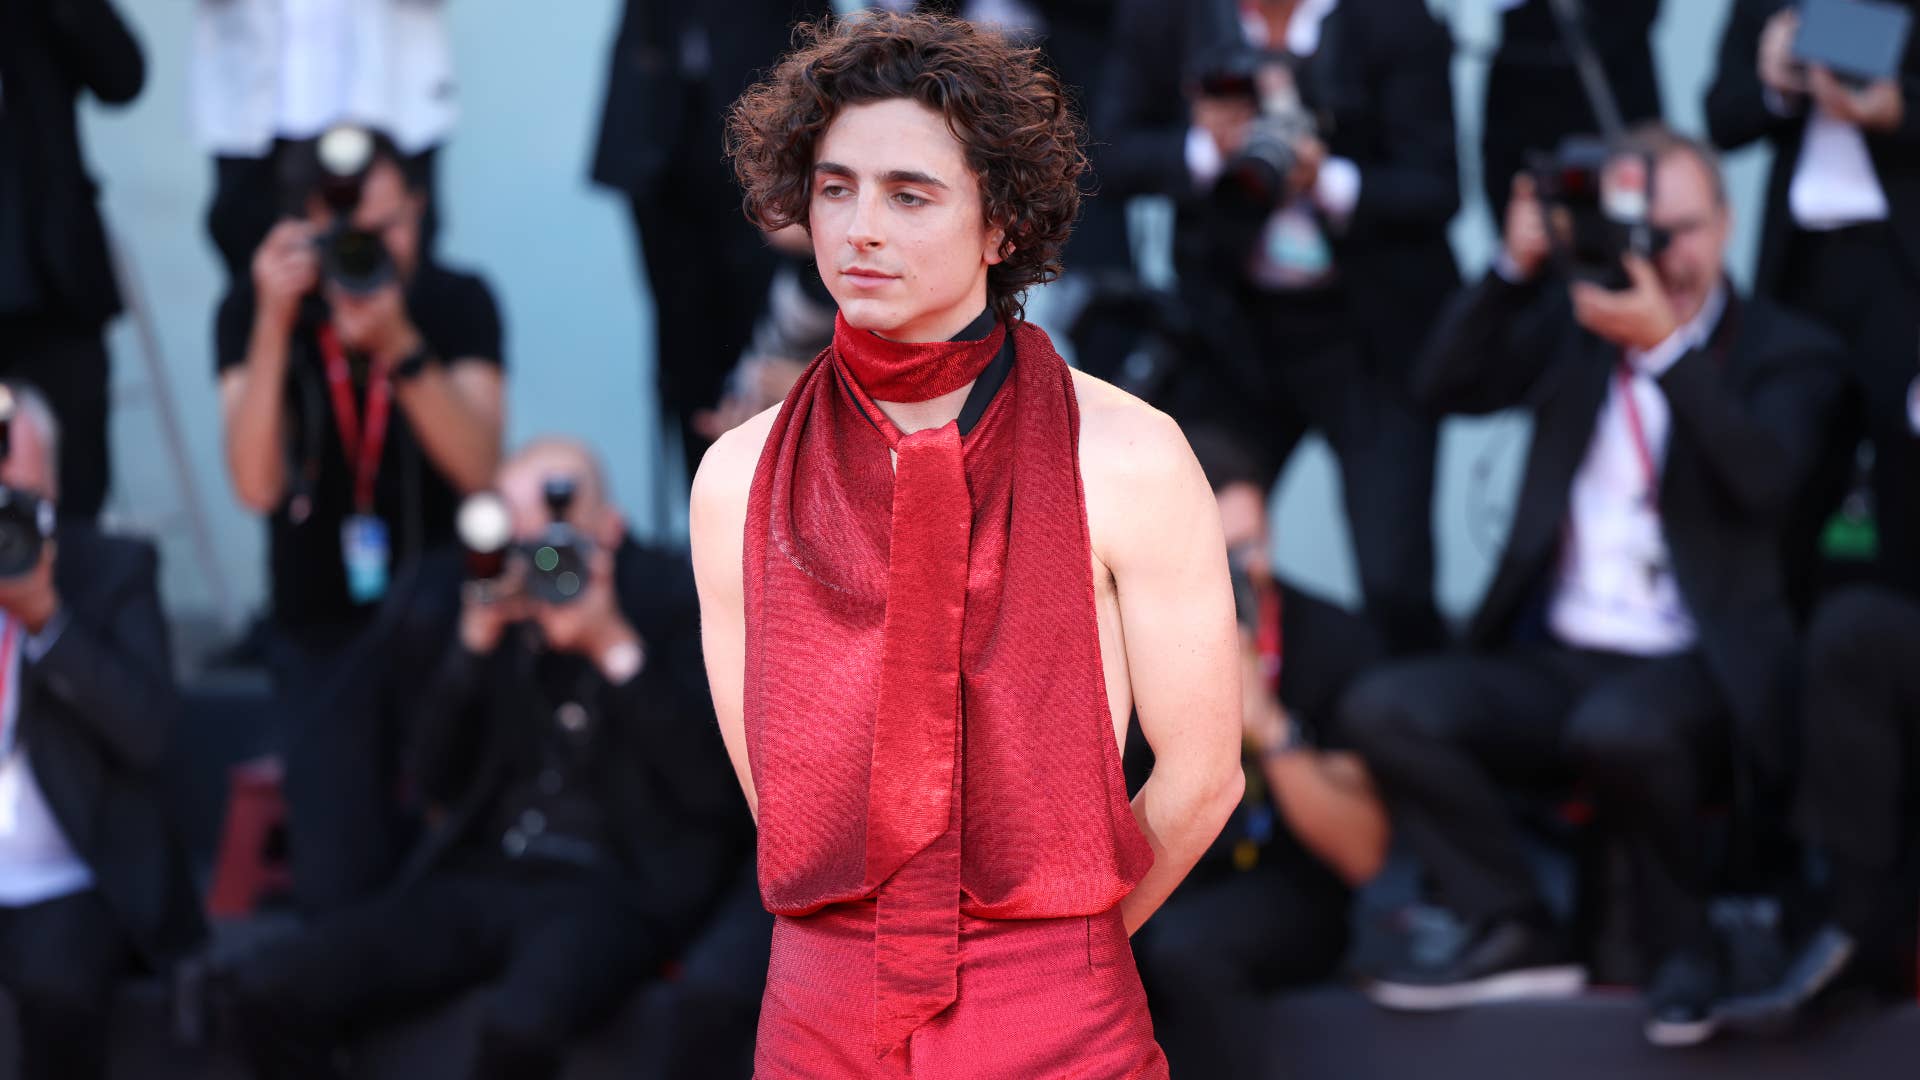 Timothee Chalamet is seen on the red carpet